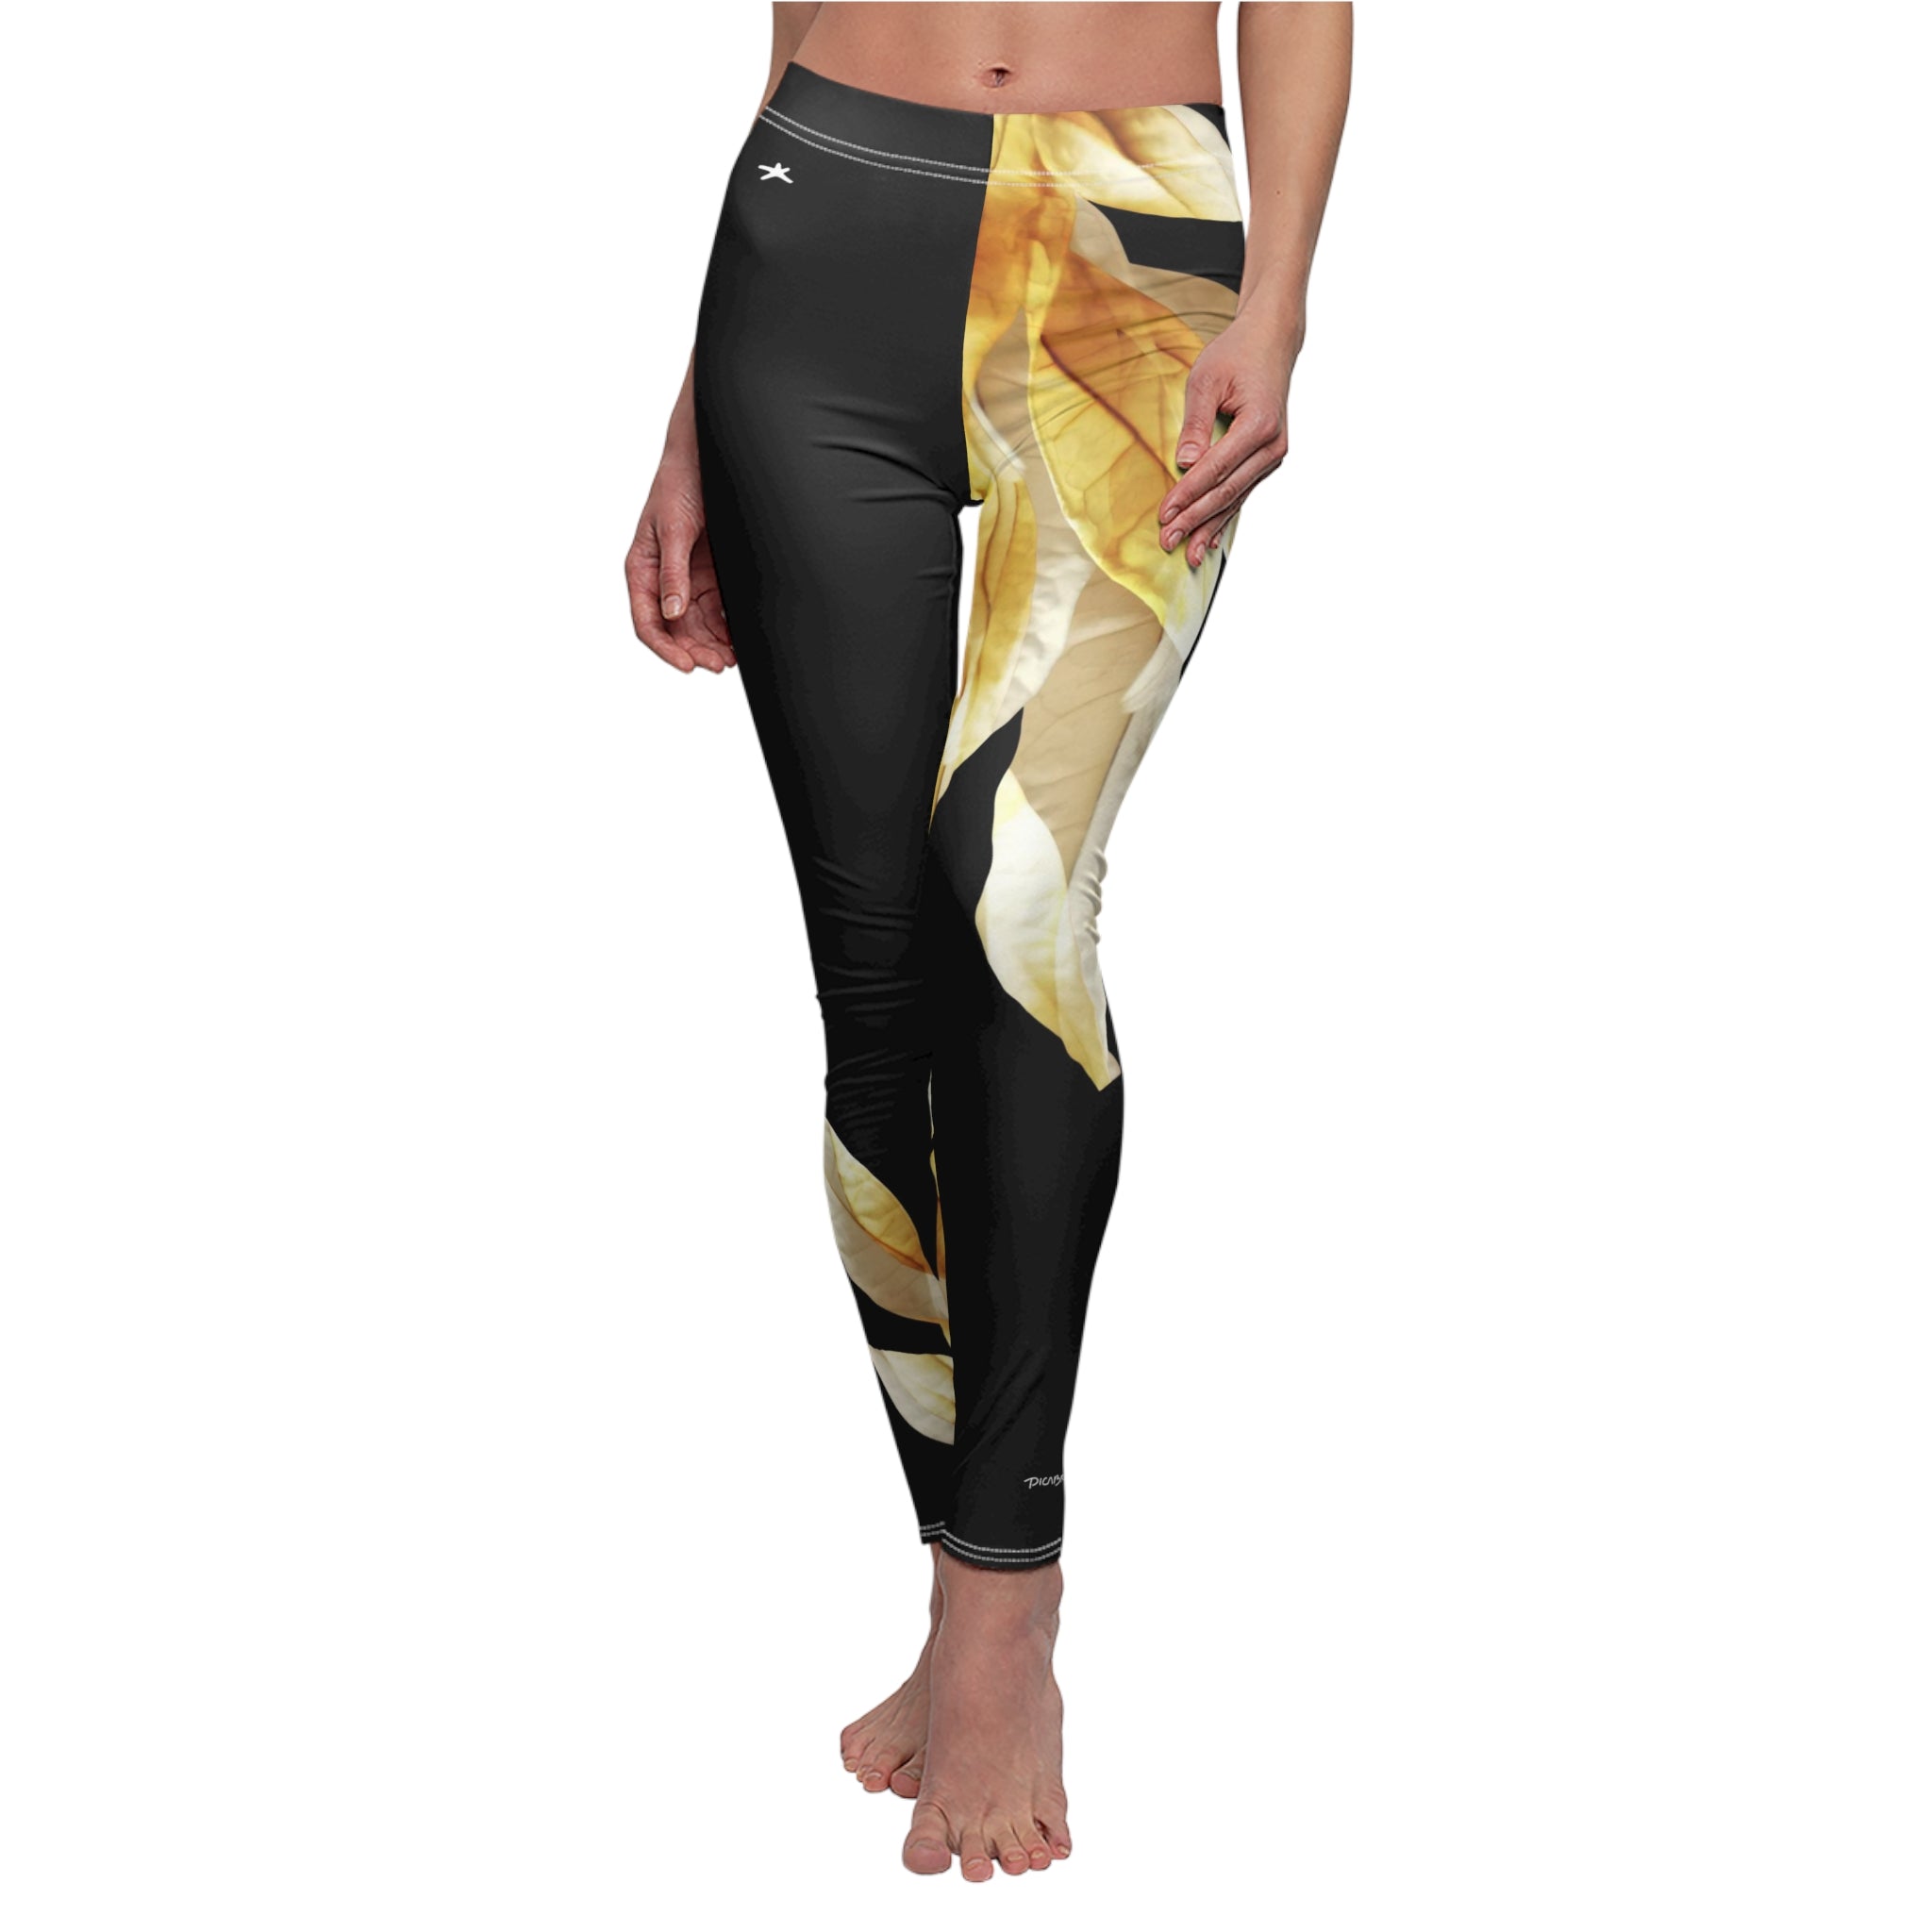 LeggingUSA Women's Rayon Stretchy Fashion Leggings Hand Painted Art Works  Gold X-Made In USA